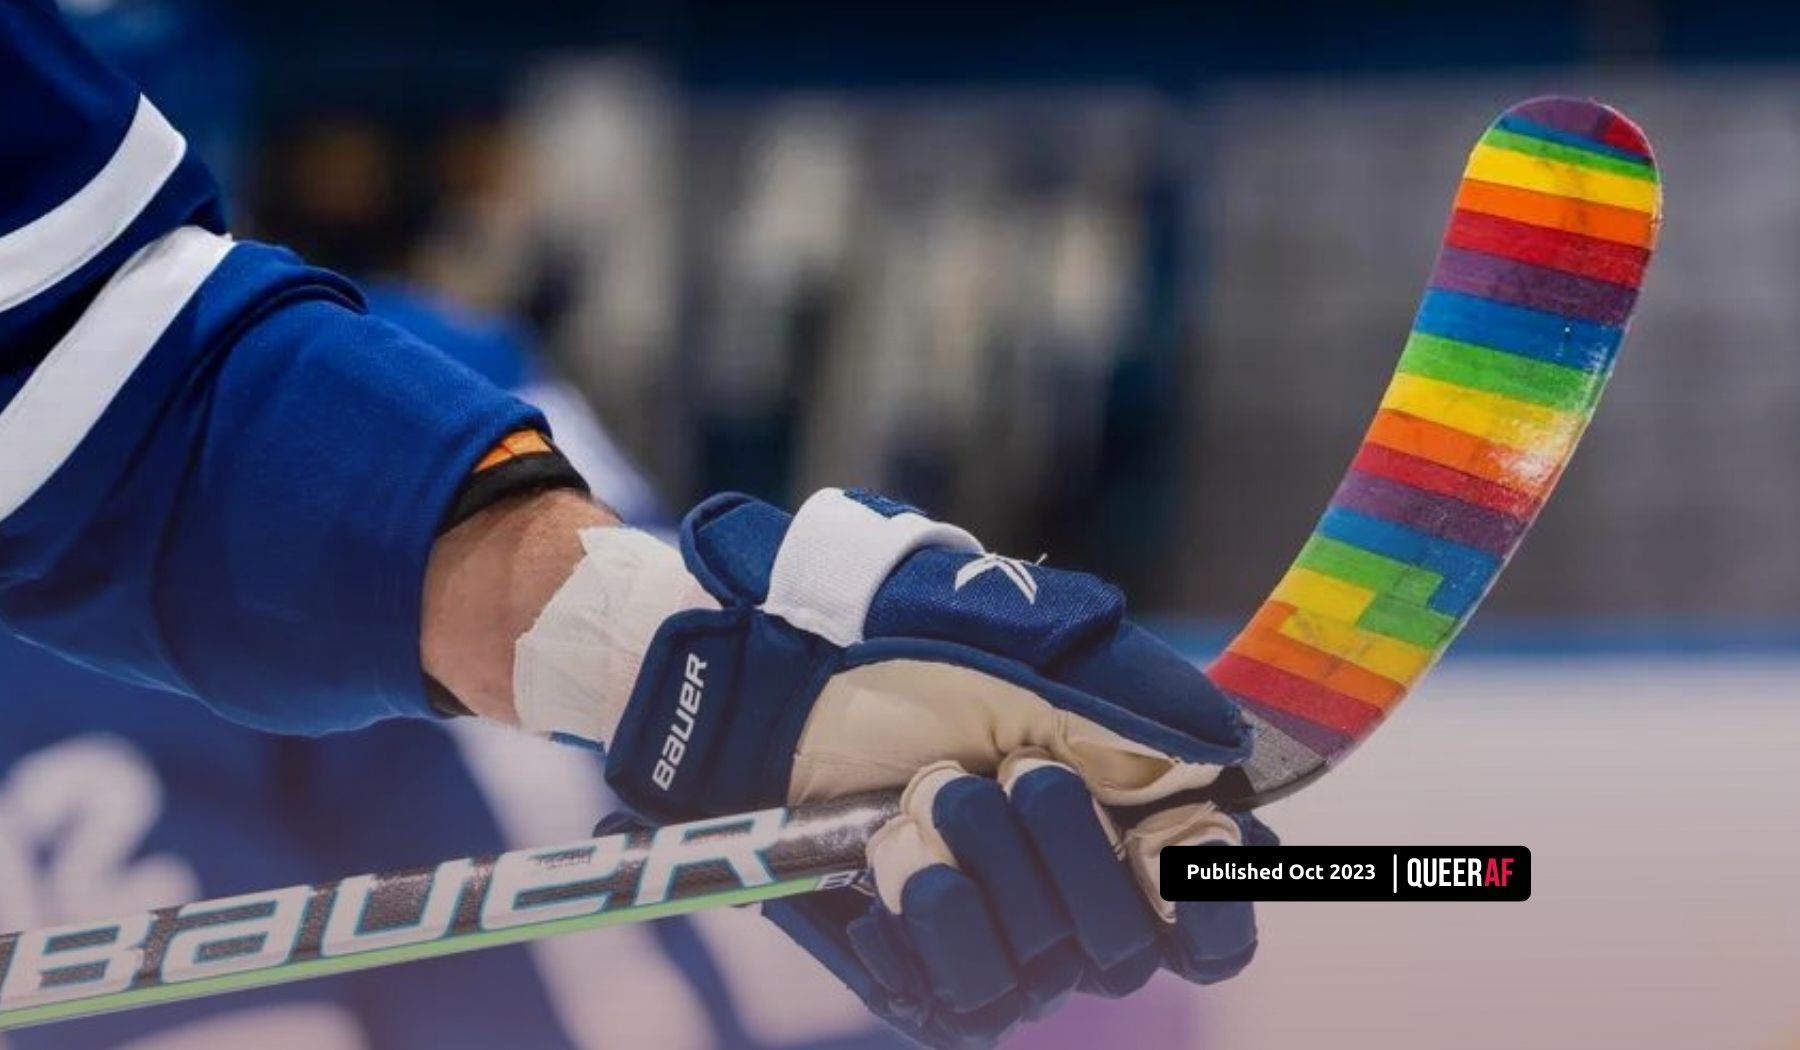 The NHL bans Pride Tape, setting off a backlash from players and